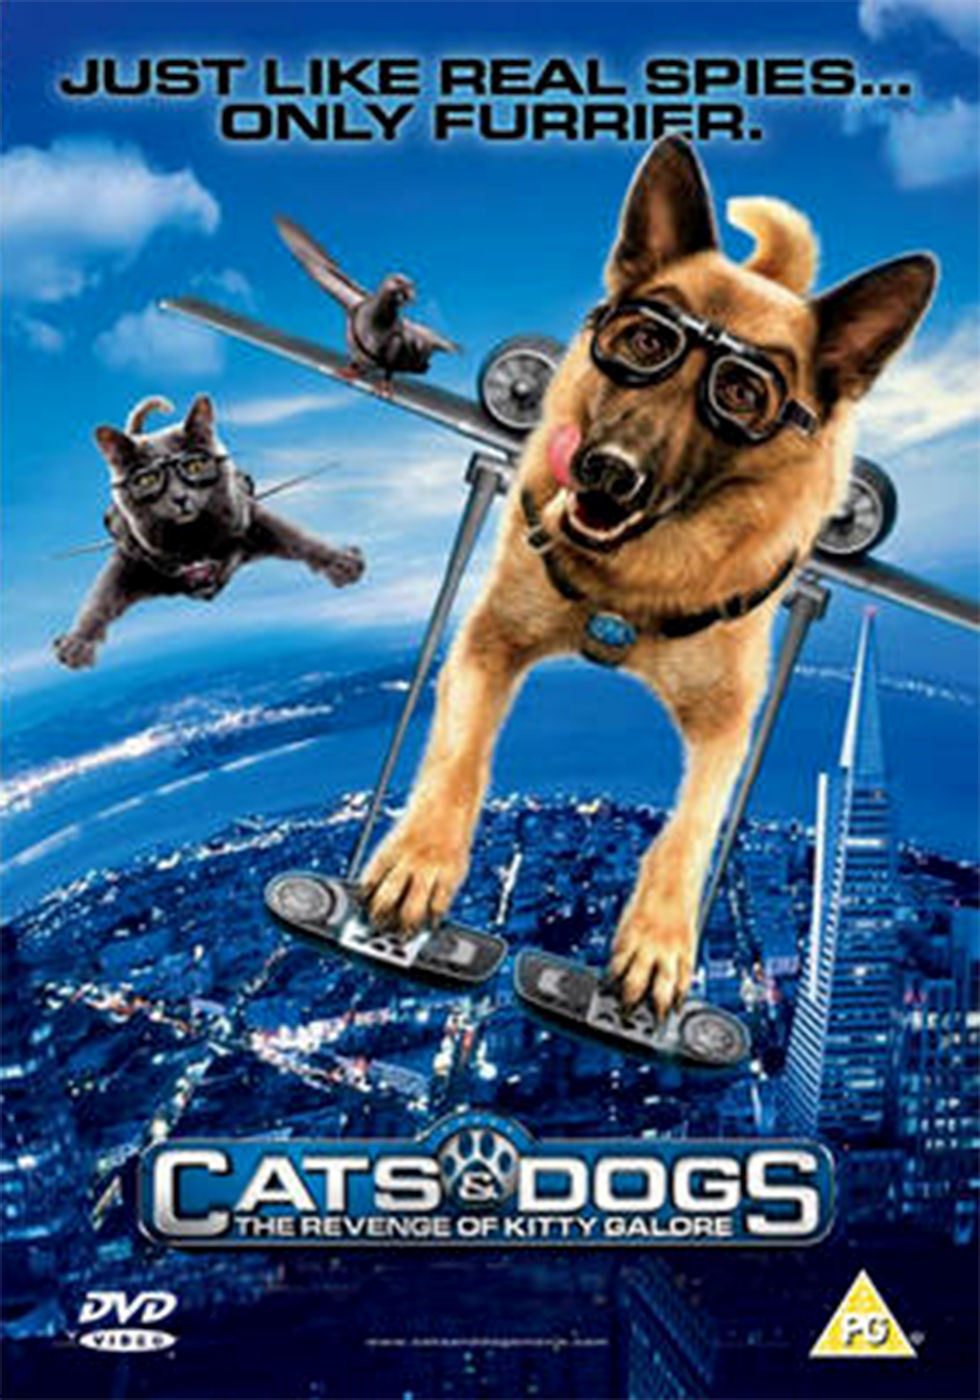 [EXRENTAL] Cats And Dogs The Revenge Of Kitty Galore (Original